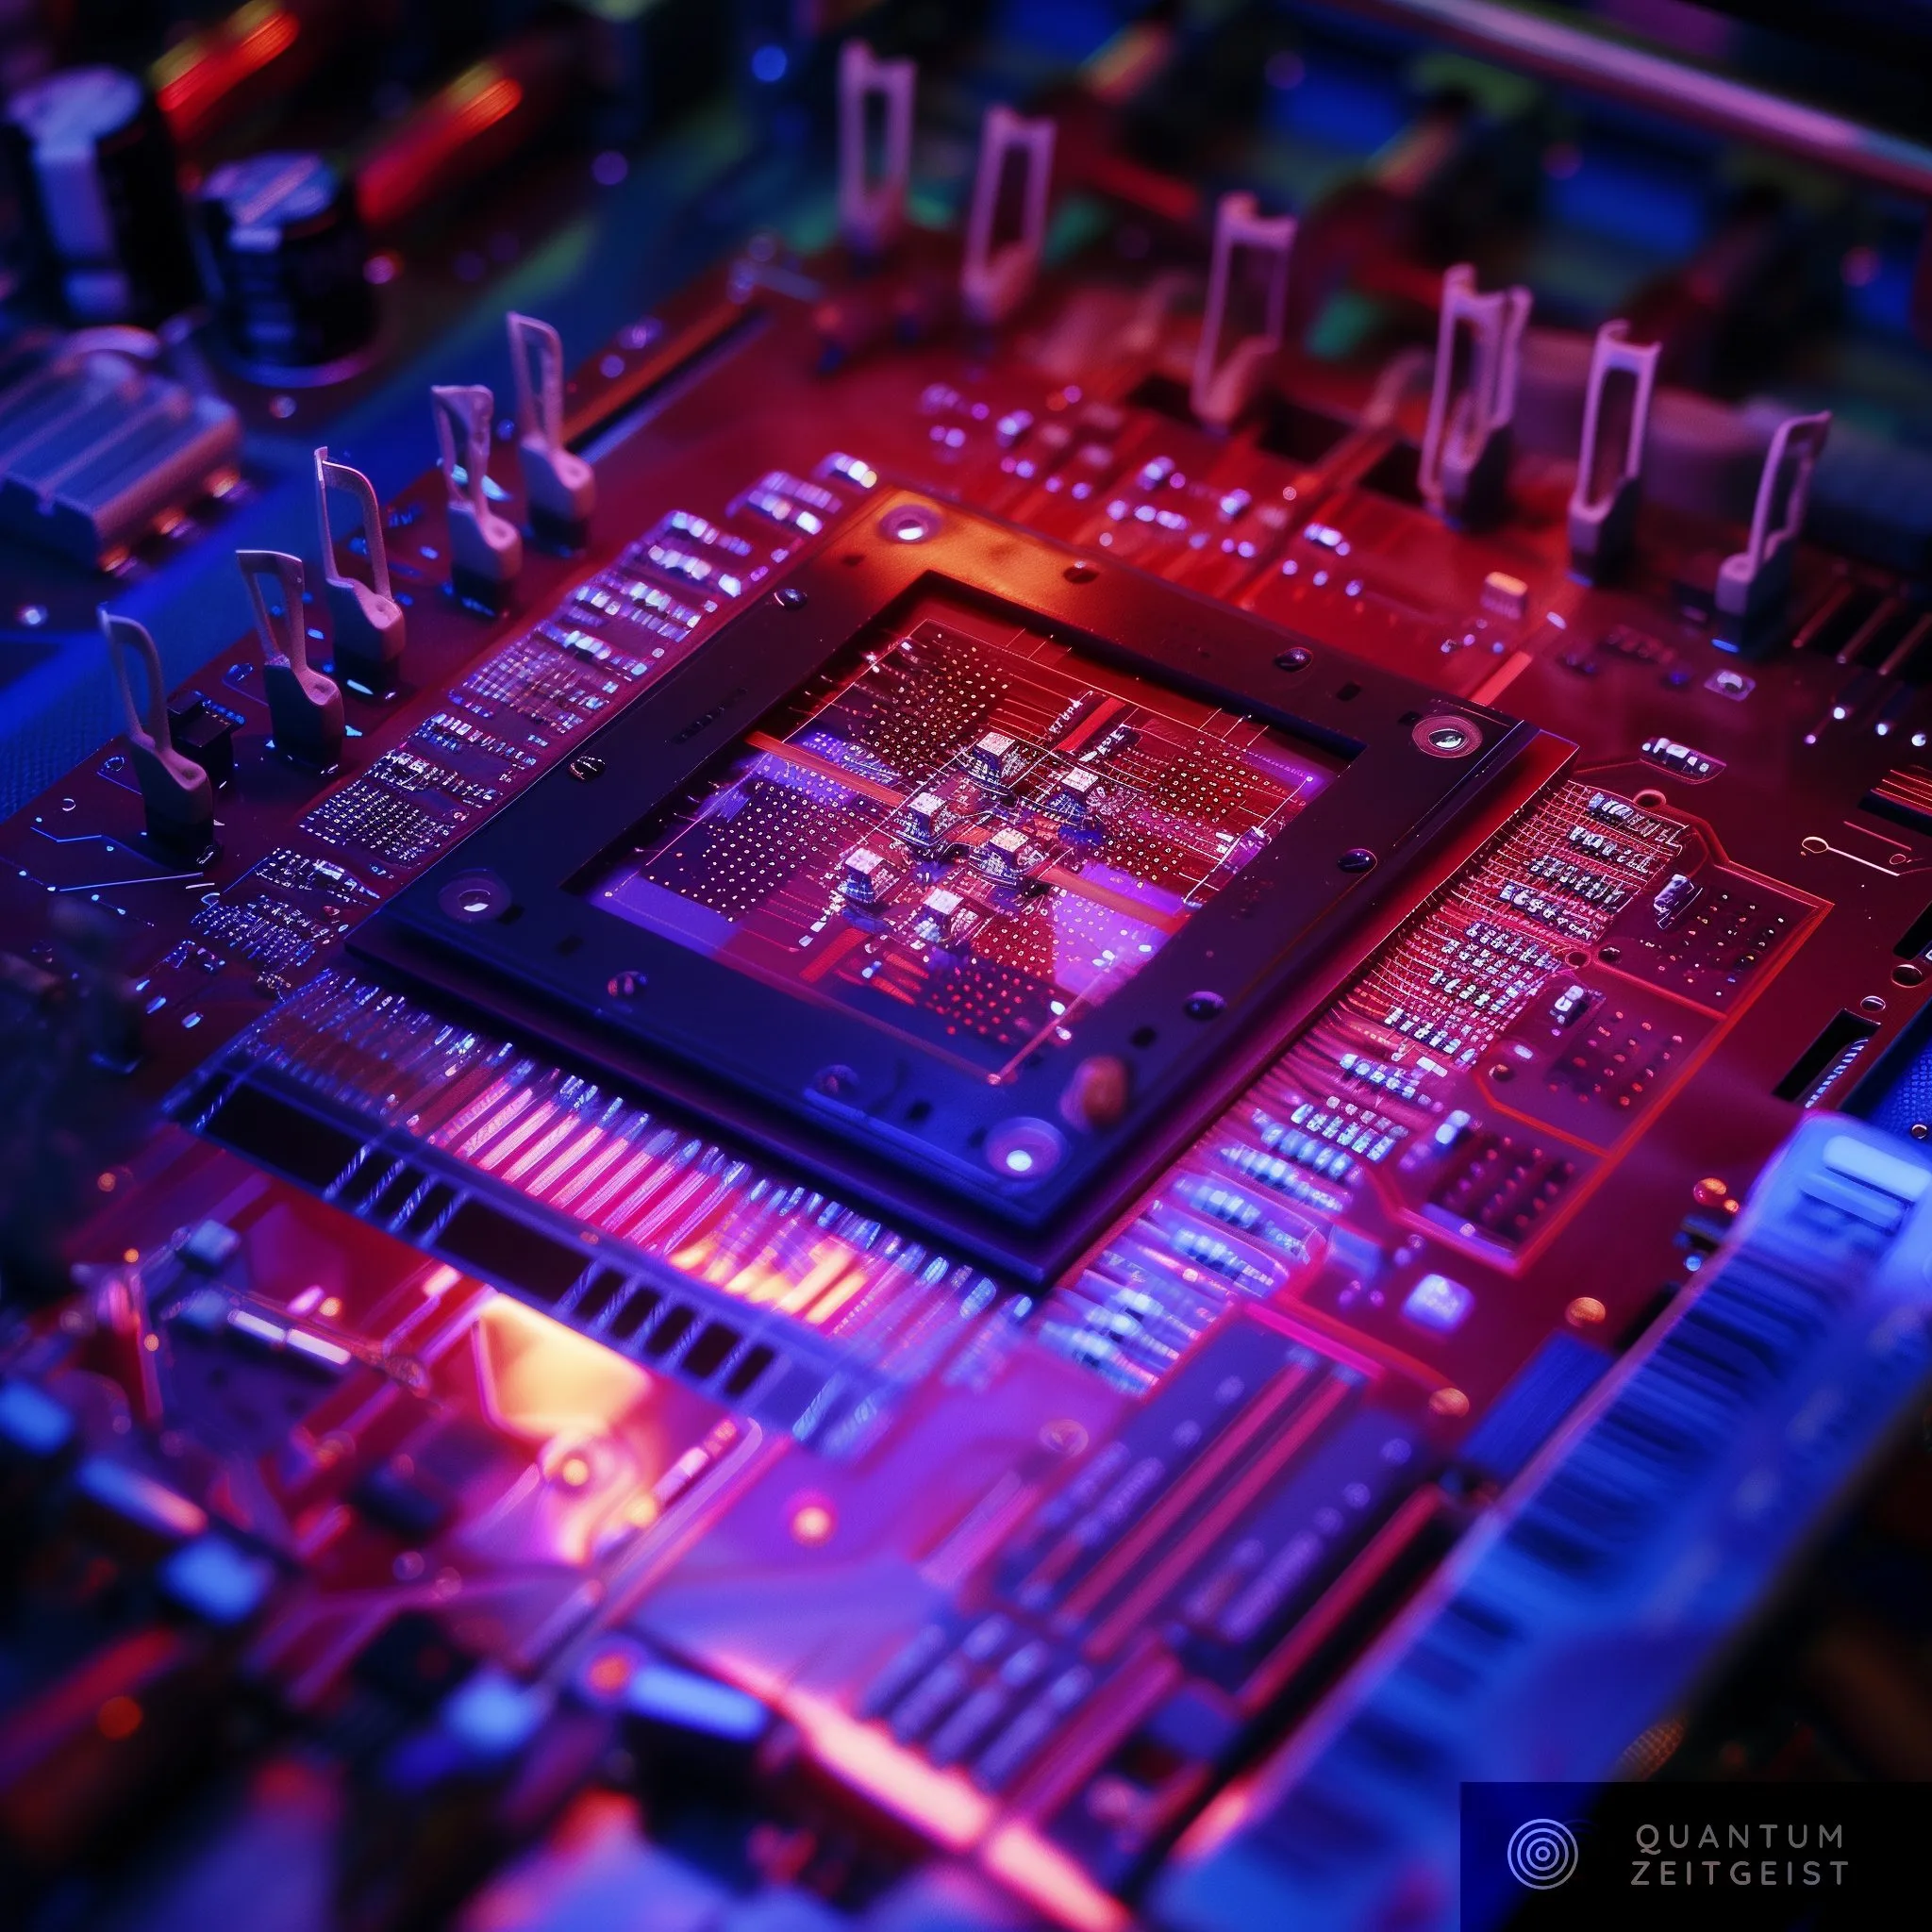 Mit And Mitre Unveil Quantum-System-On-Chip, Paving Way For Practical Quantum Computing